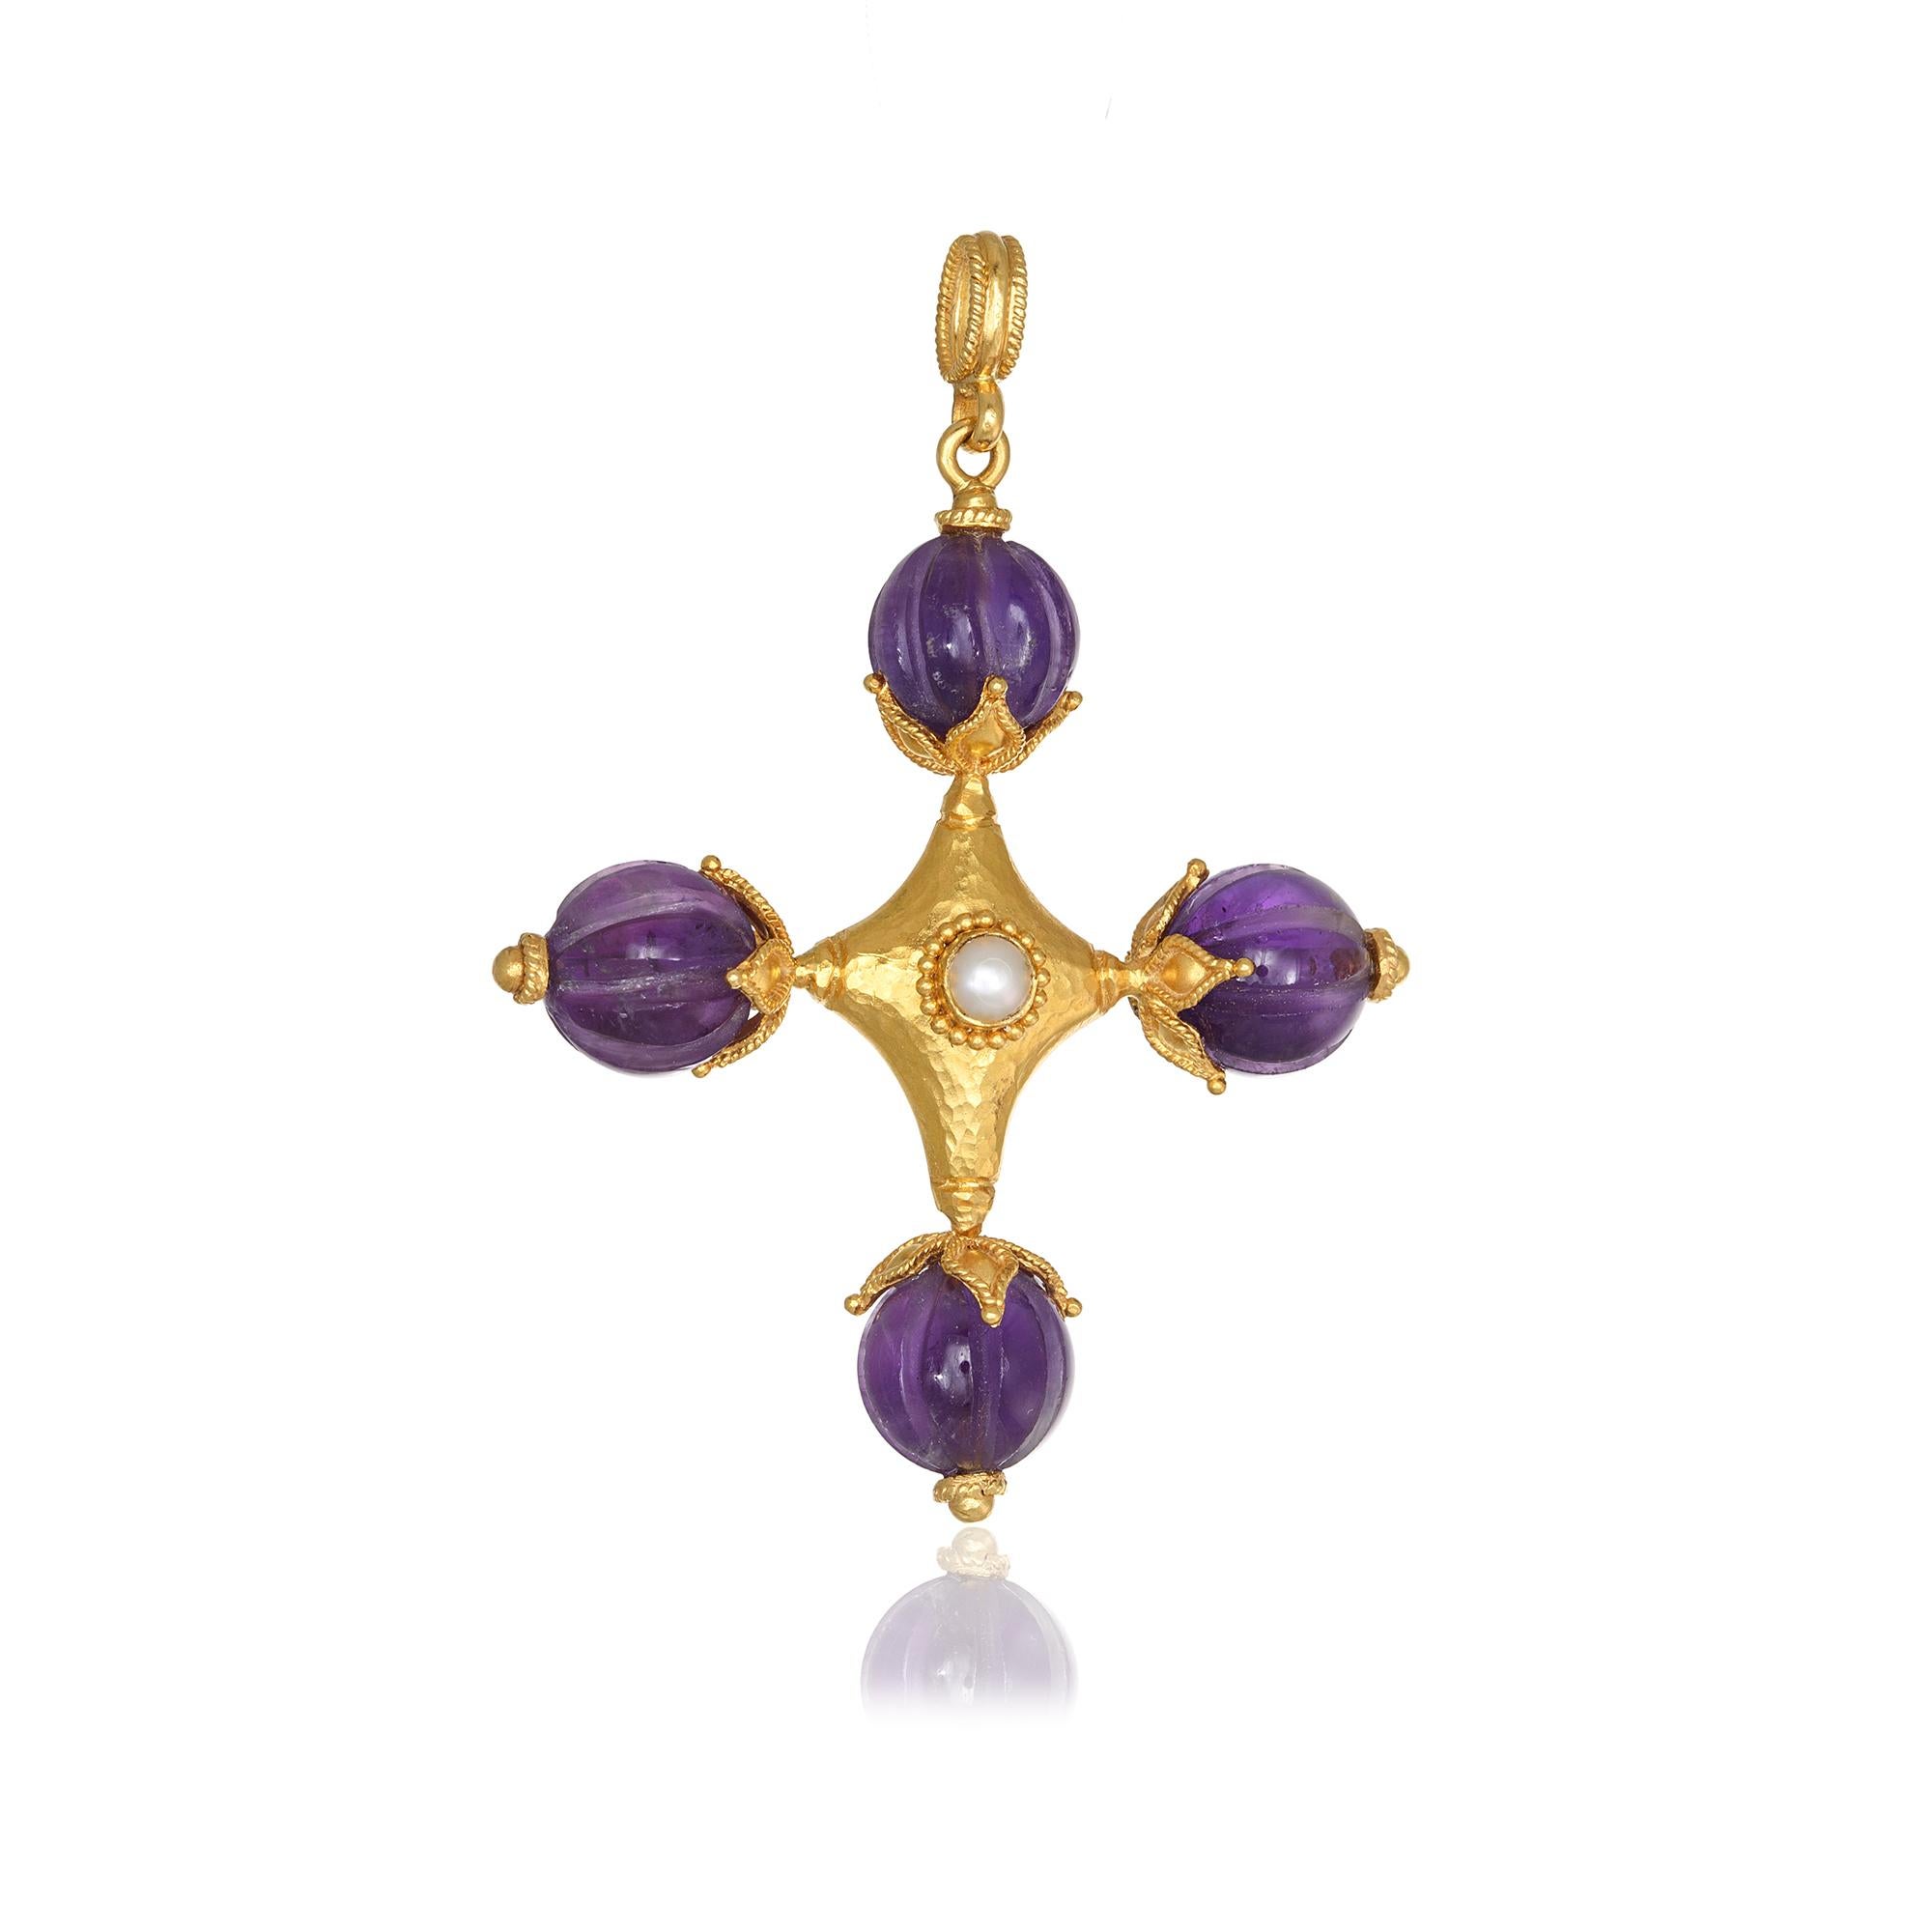 Cross Hand hammering  Pendant Necklace handcrafted in 22Kt yellow gold, featurig pearl center and carved Amethyst in each edge. This One-Of-A-Kind cross is created using the ancestral techniques of hand hammering, granulation and filigree. The 22Kt 